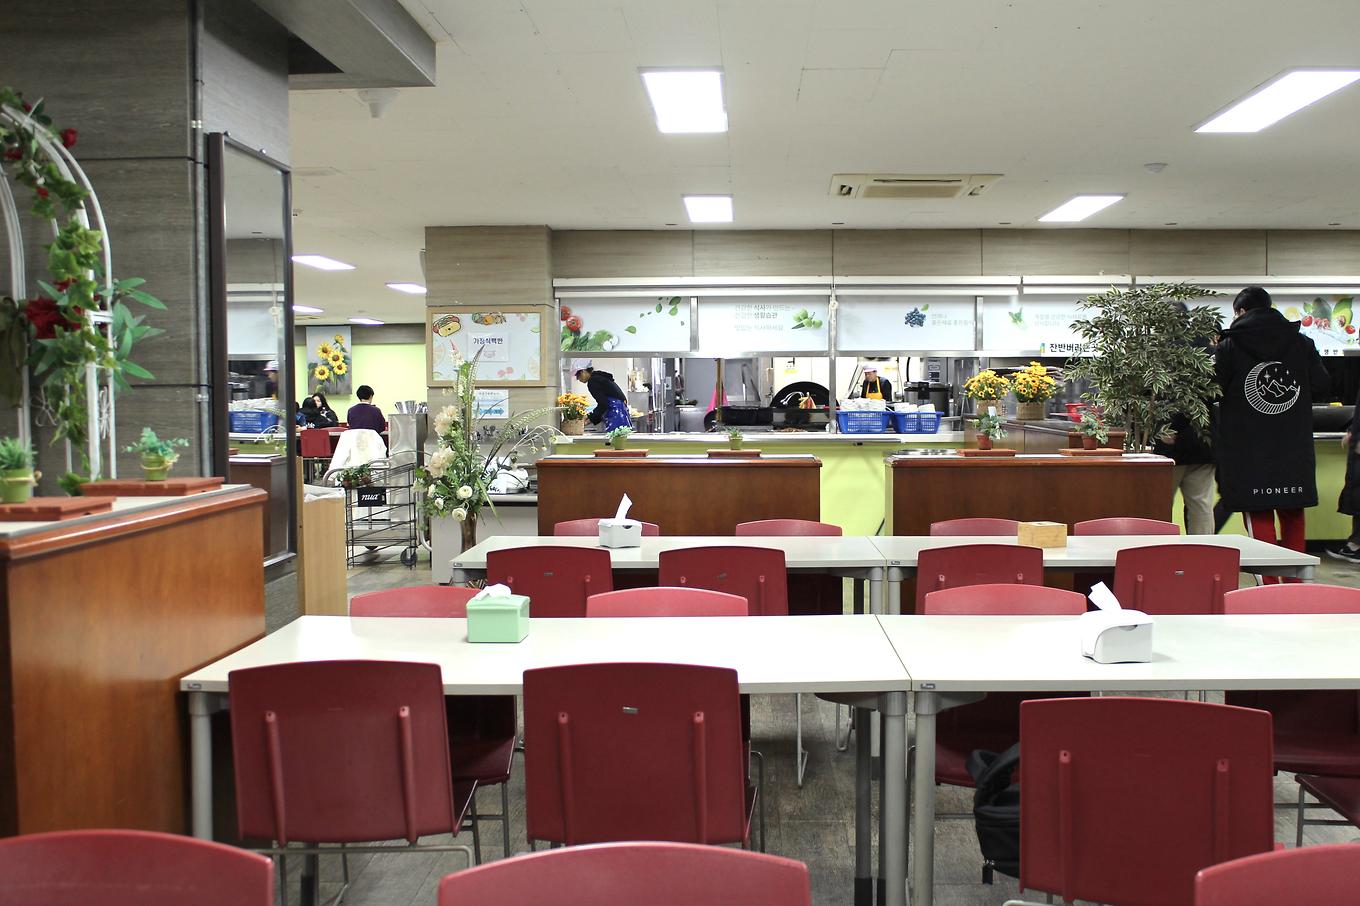 Staff and Student Cafeteria(Canteen)